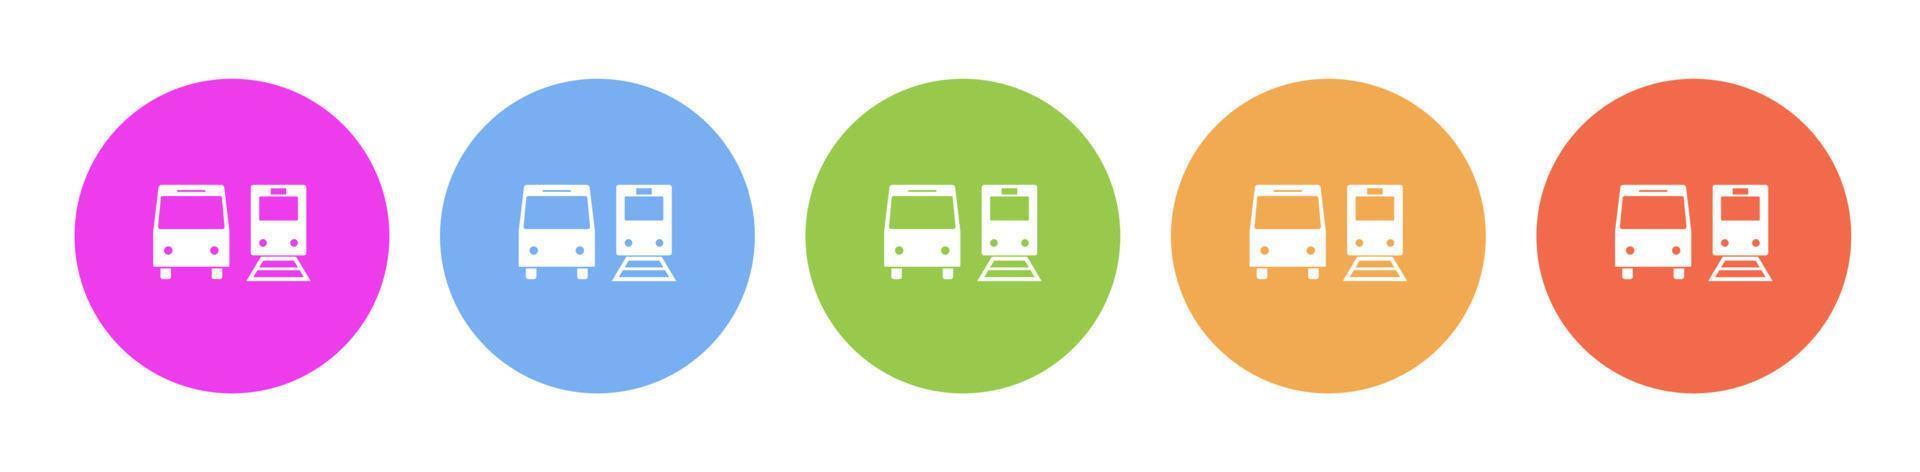 Multi colored flat icons on round backgrounds. Bus, train multicolor circle vector icon on white background